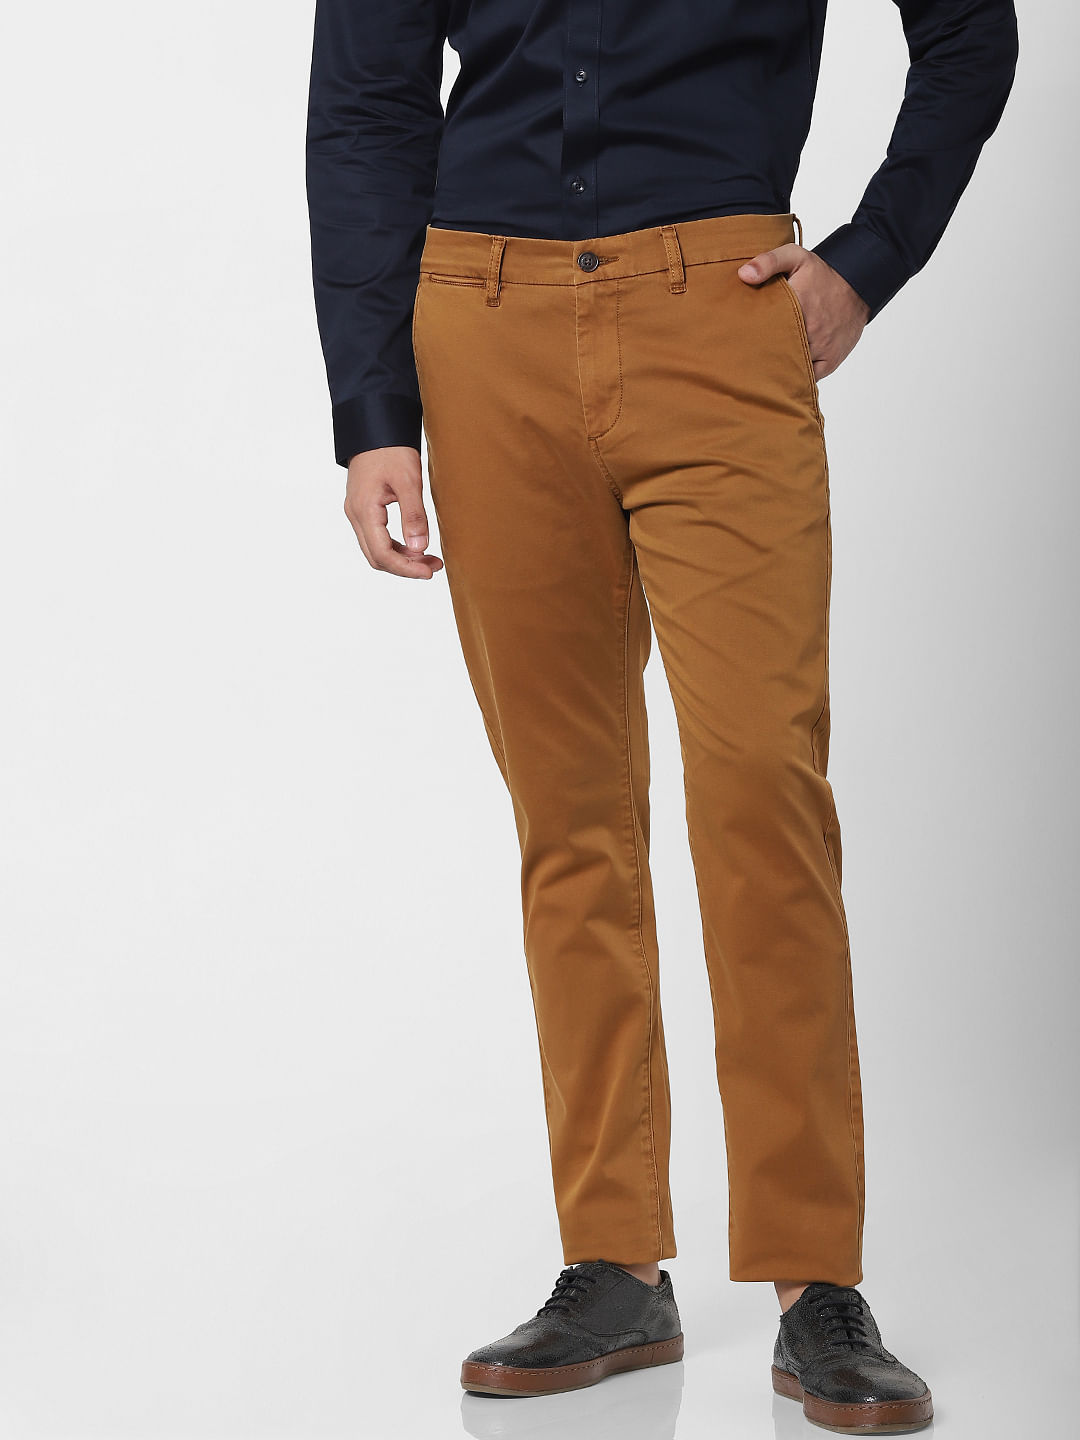 Best Mens Chinos | Men Chino Collection By Paul Brown